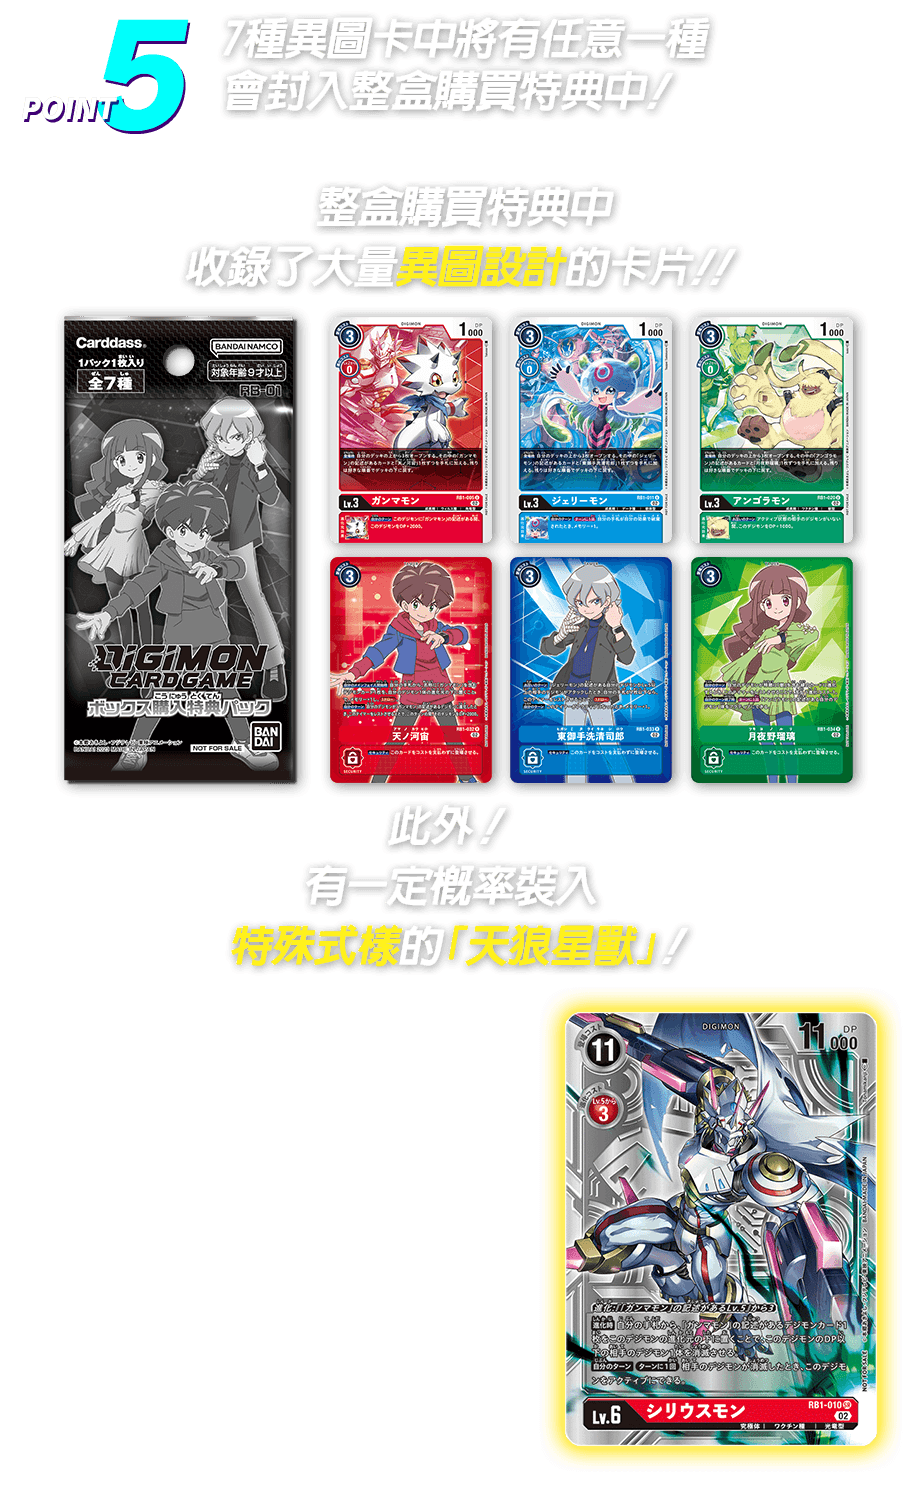 POINT5 Box topper pack: Showcase of included cards